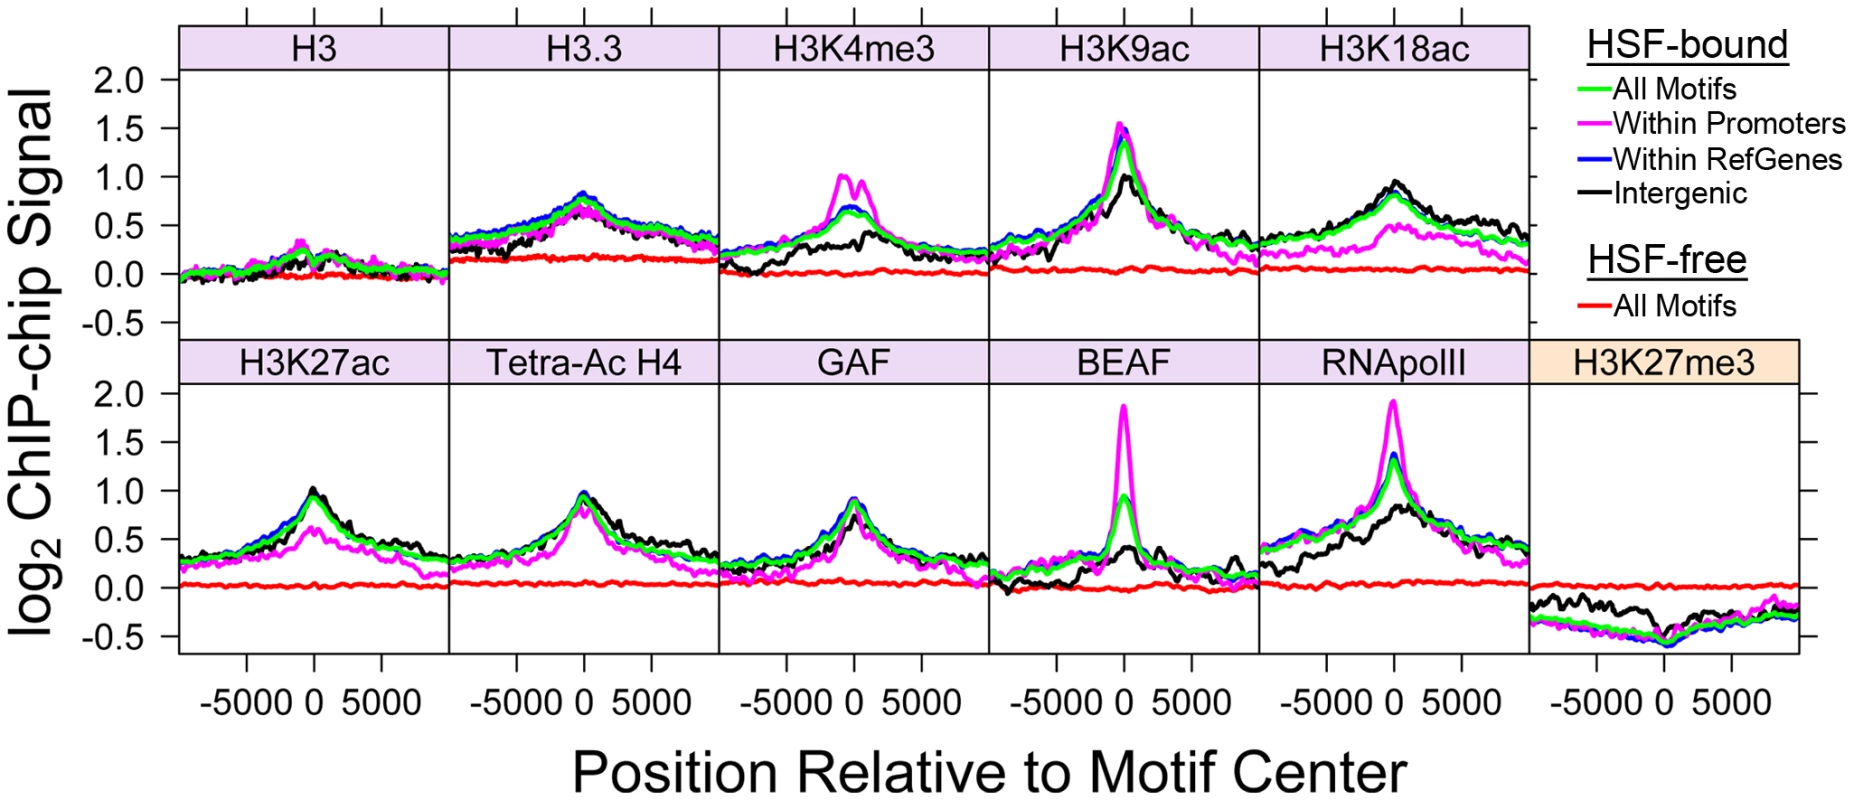 Bound HSE motifs contain marks of active chromatin prior to HSF binding.